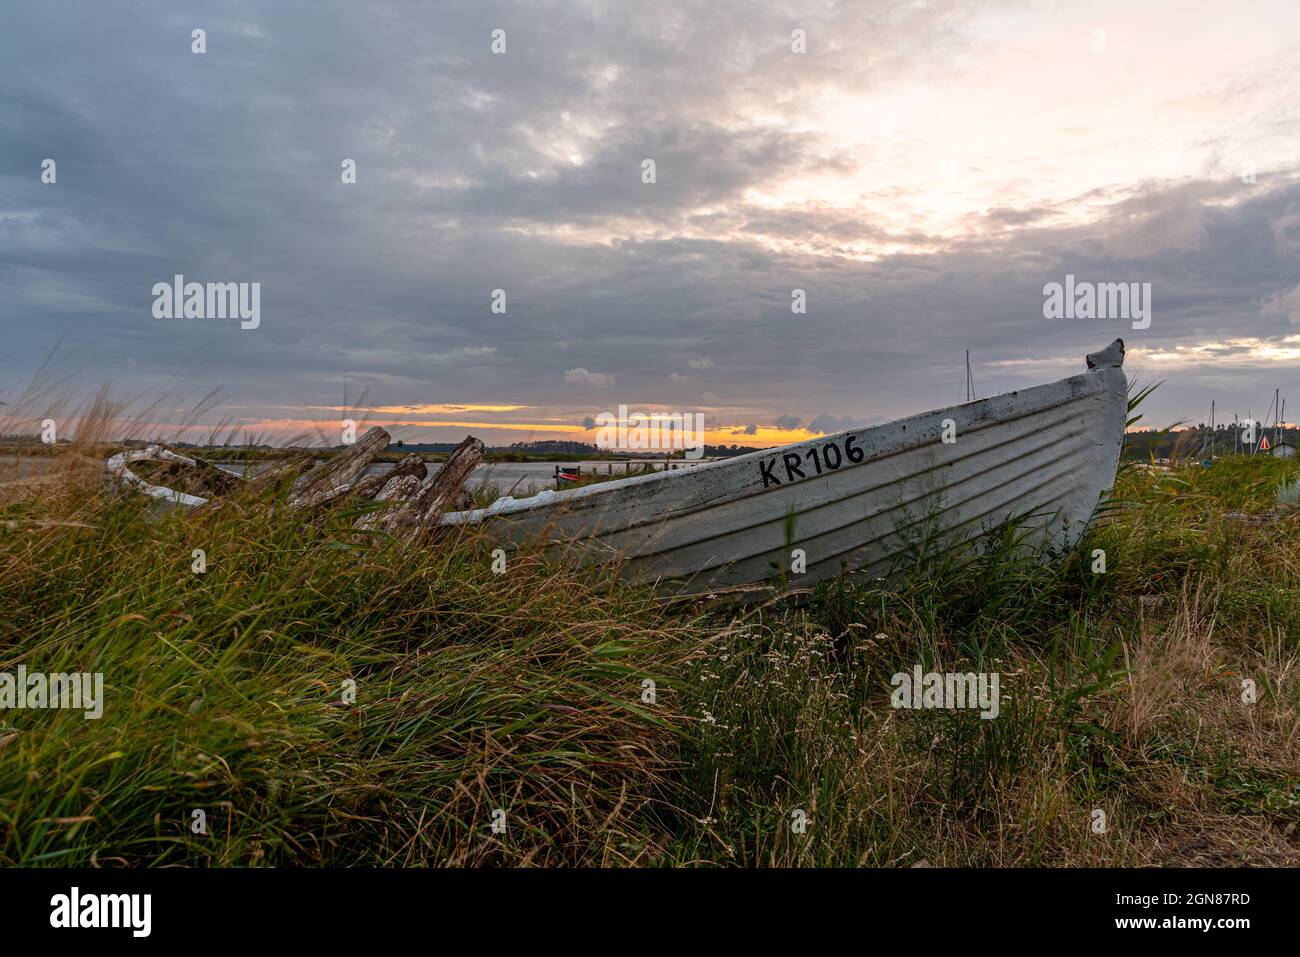 an old wrecked rowboat on the shore, overgrown with grass in the sunset, Bisserup, Denmark, August 8, 2021 Stock Photo